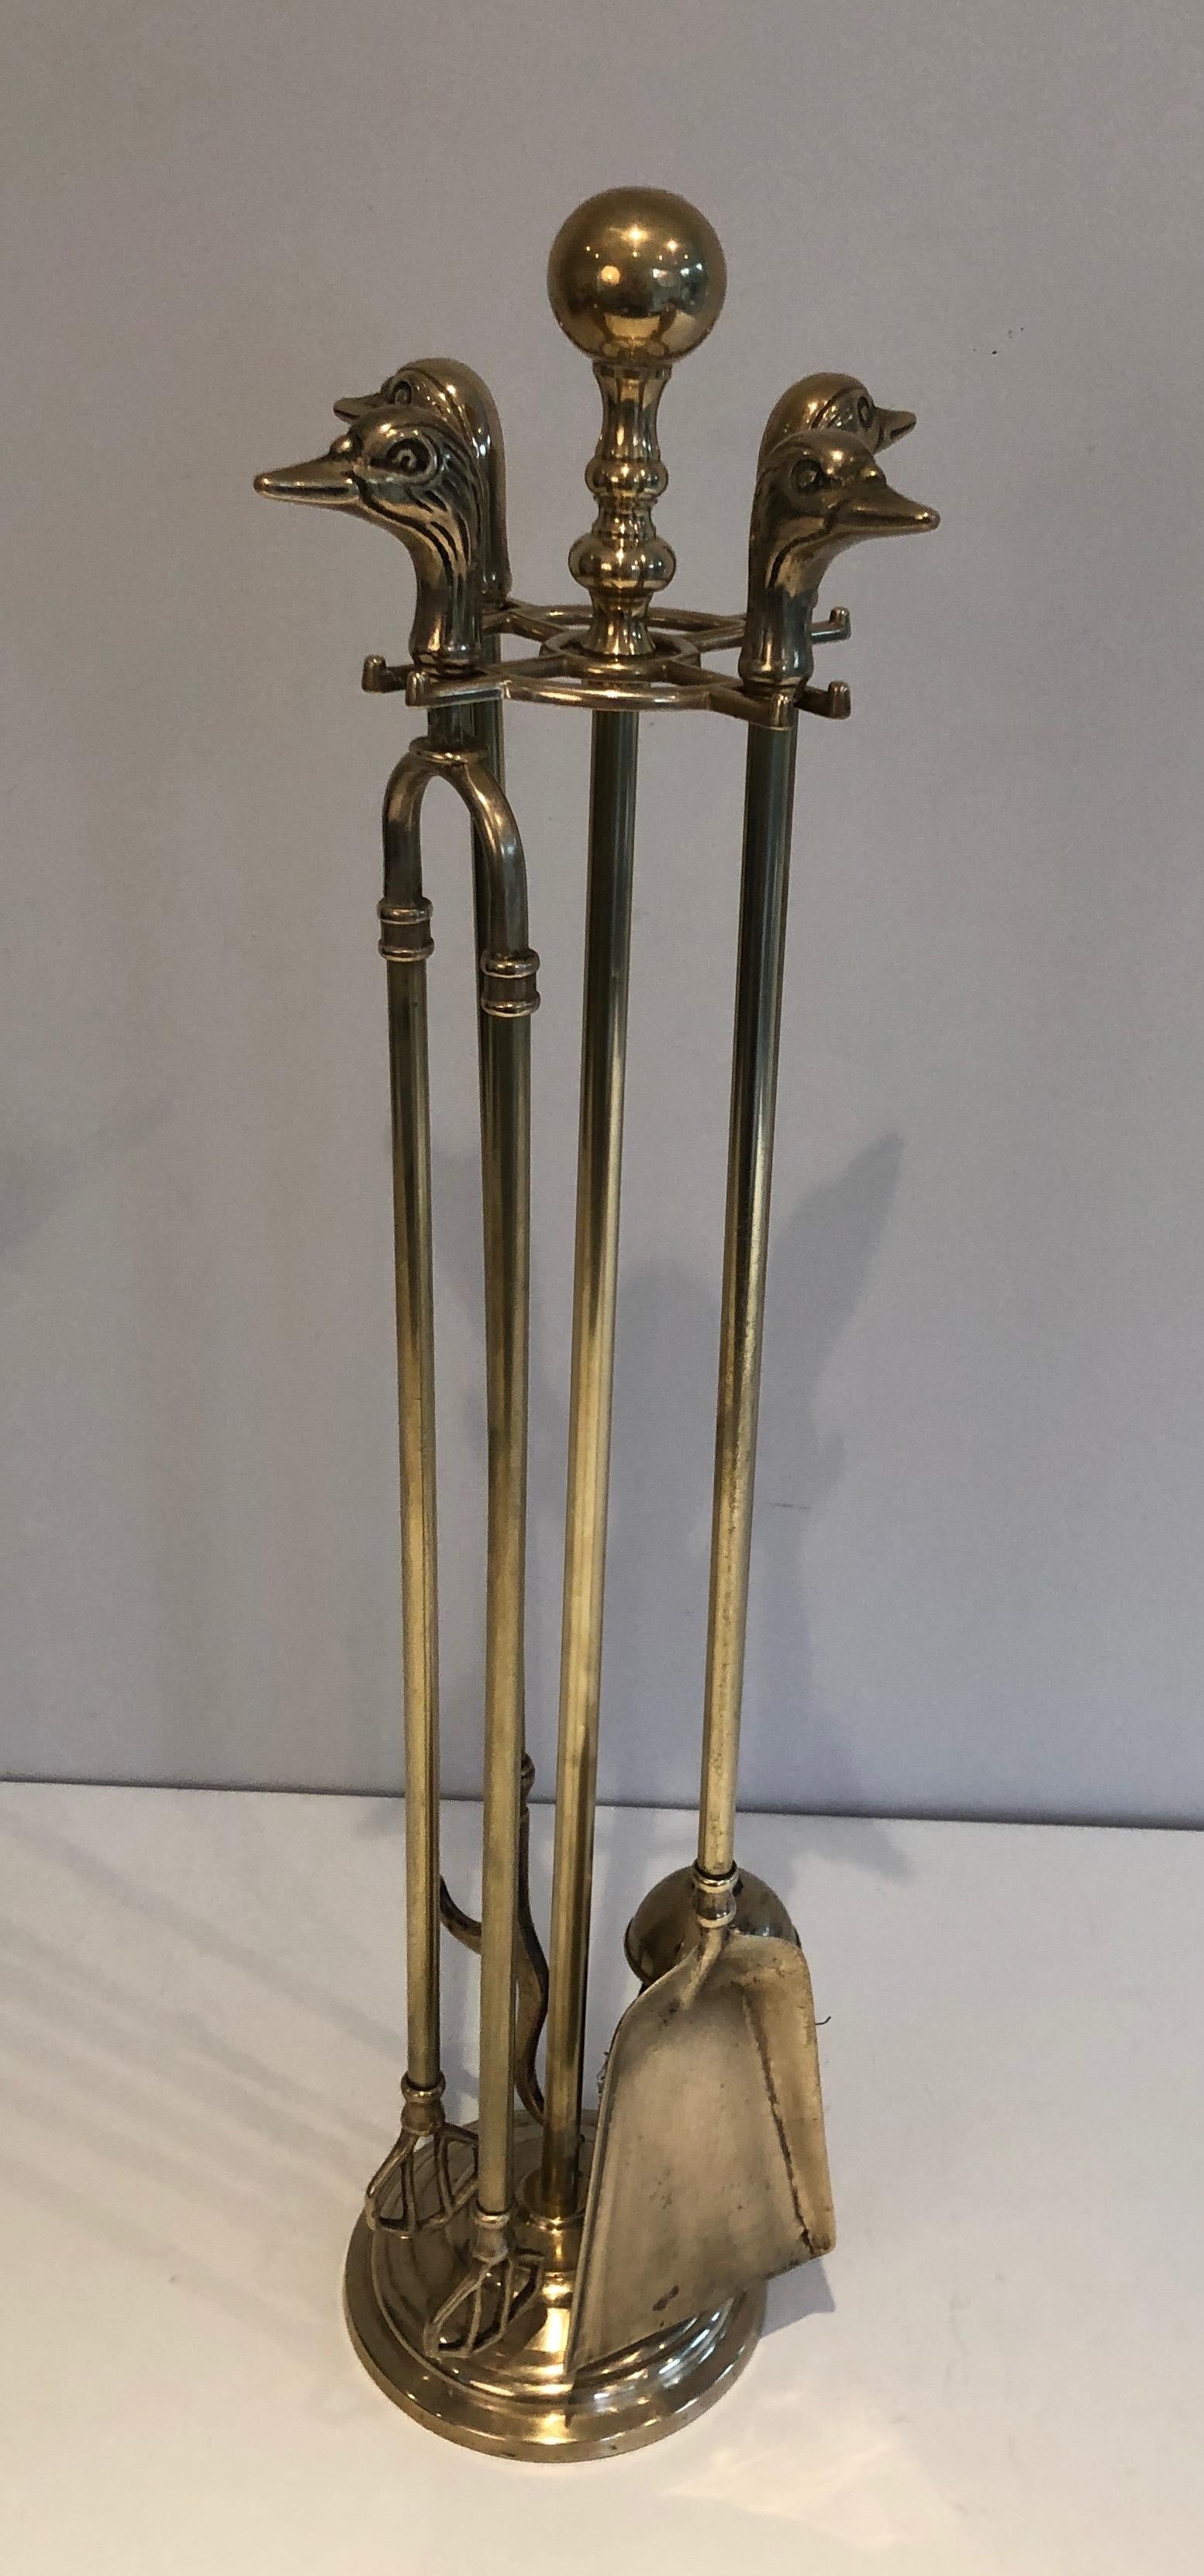 This neoclassical style fireplace tools on stand are made of brass. They have duck heads handles. This is a French work. Circa 1970.